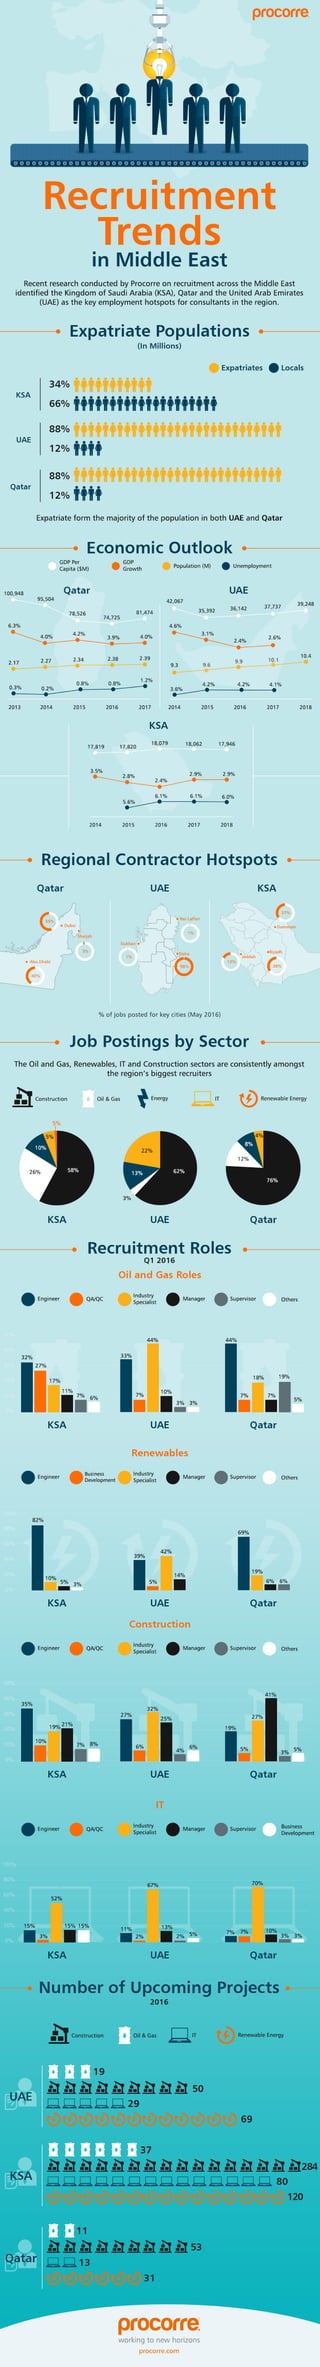 Recruitment Trends in Middle East by Procorre